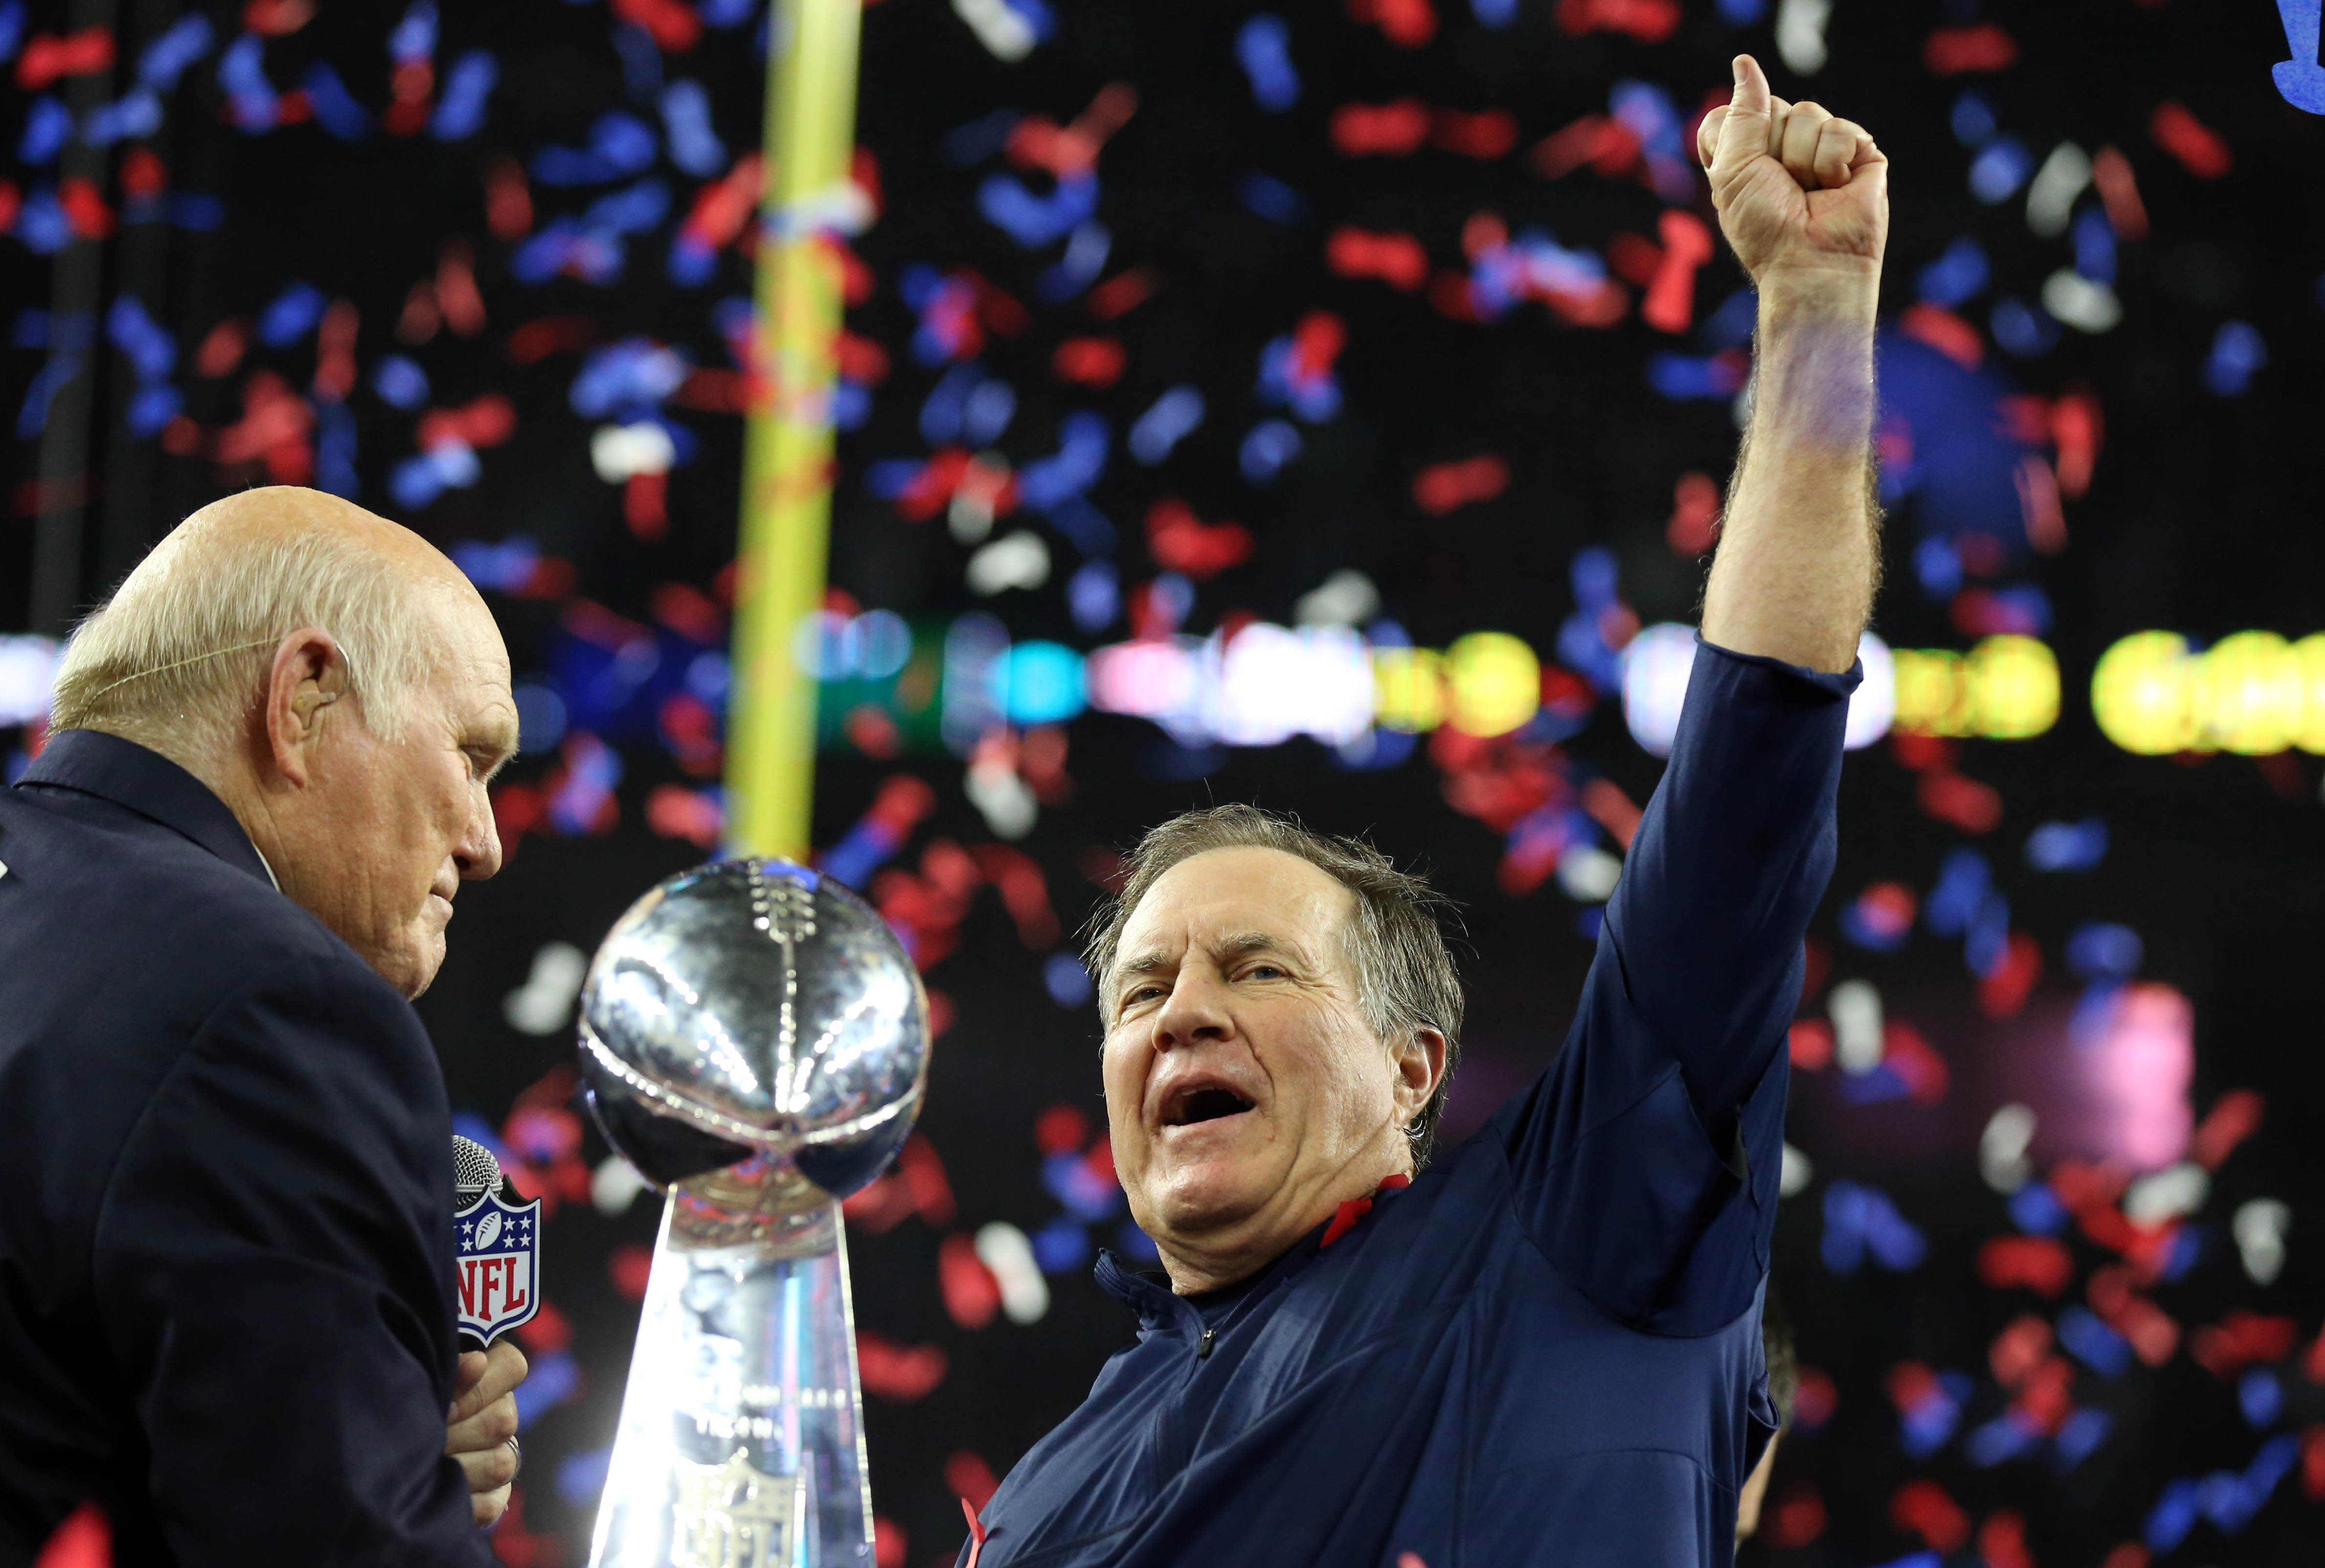 Feb 5, 2017; Houston, TX, USA; New England Patriots head coach Bill Belichick celebrates with the Vince Lombardi Trophy after beating the Atlanta Falcons during Super Bowl LI at NRG Stadium.